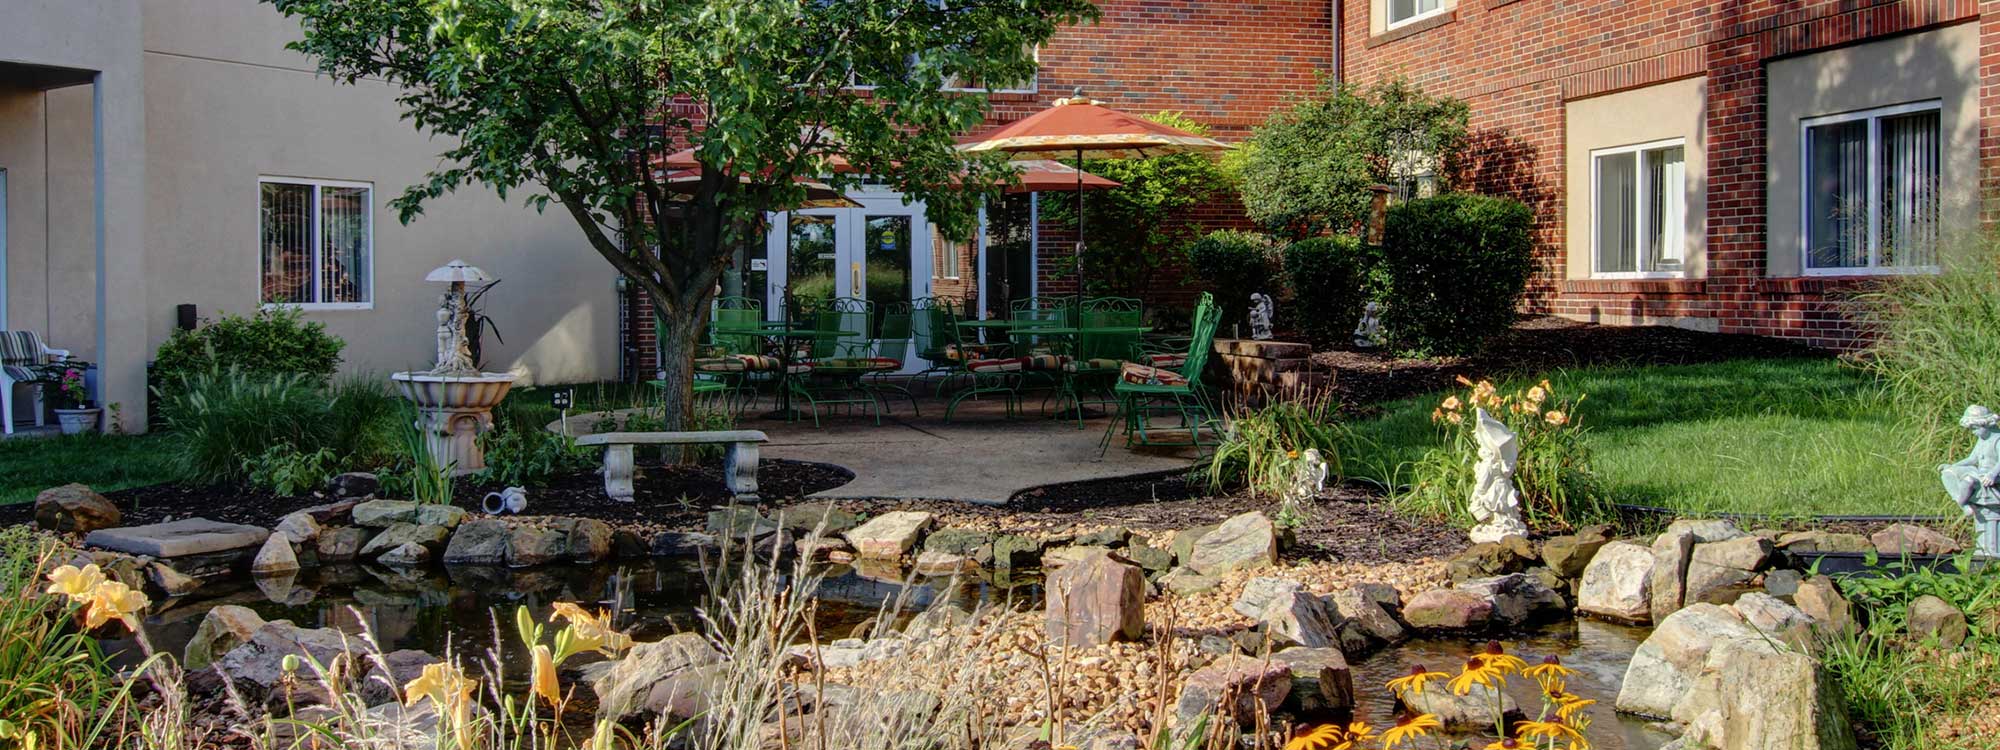 Courtyard view of the Richmond Terrace assisted living community with pond, patio seating, and landscaping in Richmond Heights, MO.